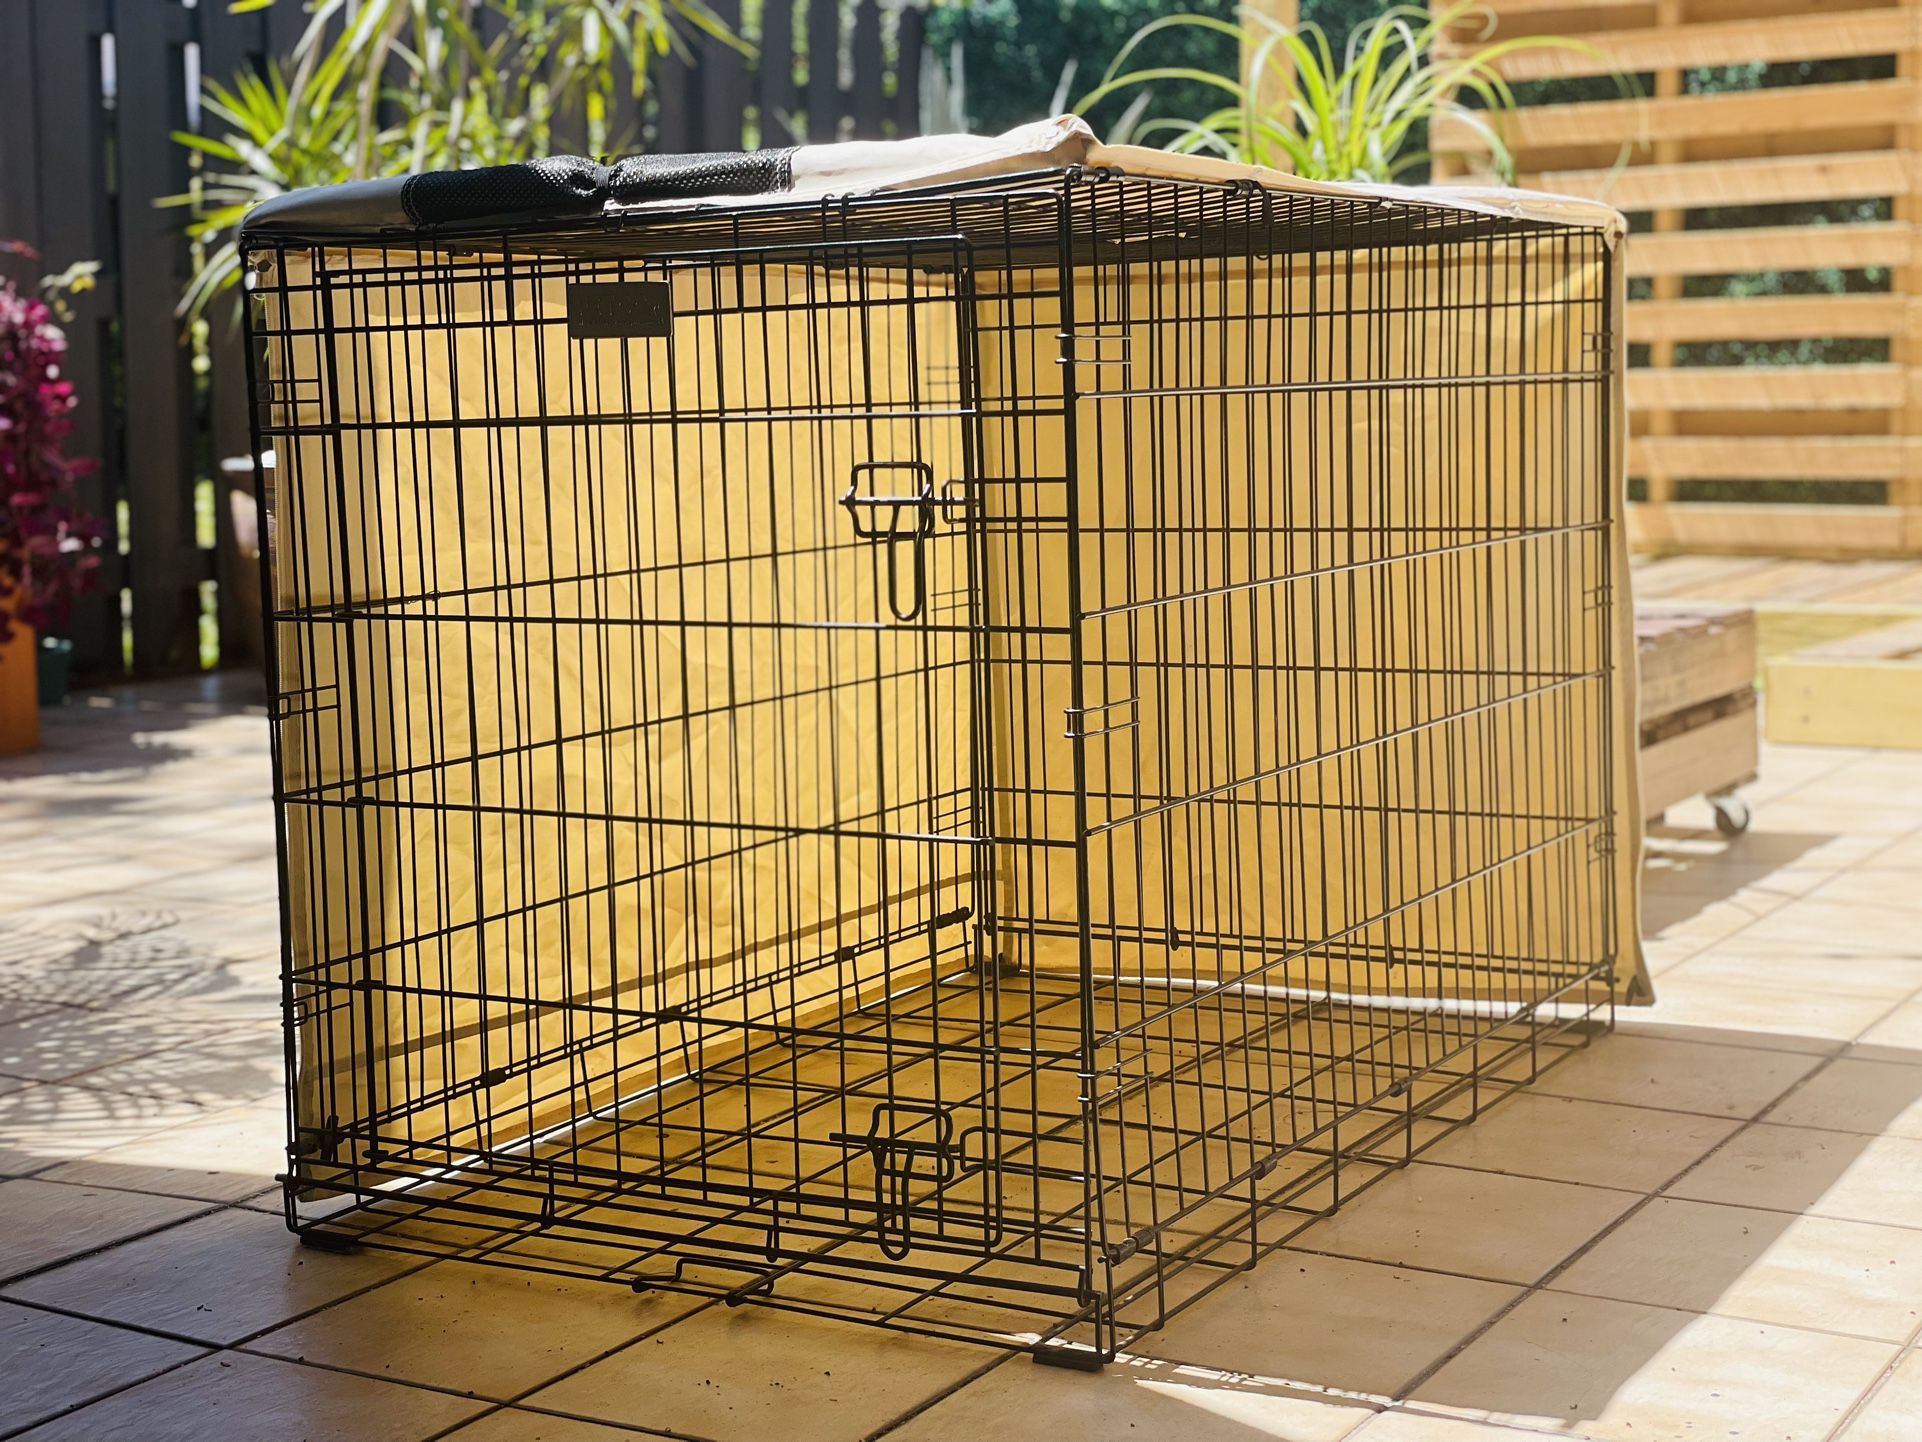 Dog Cage / Crate 